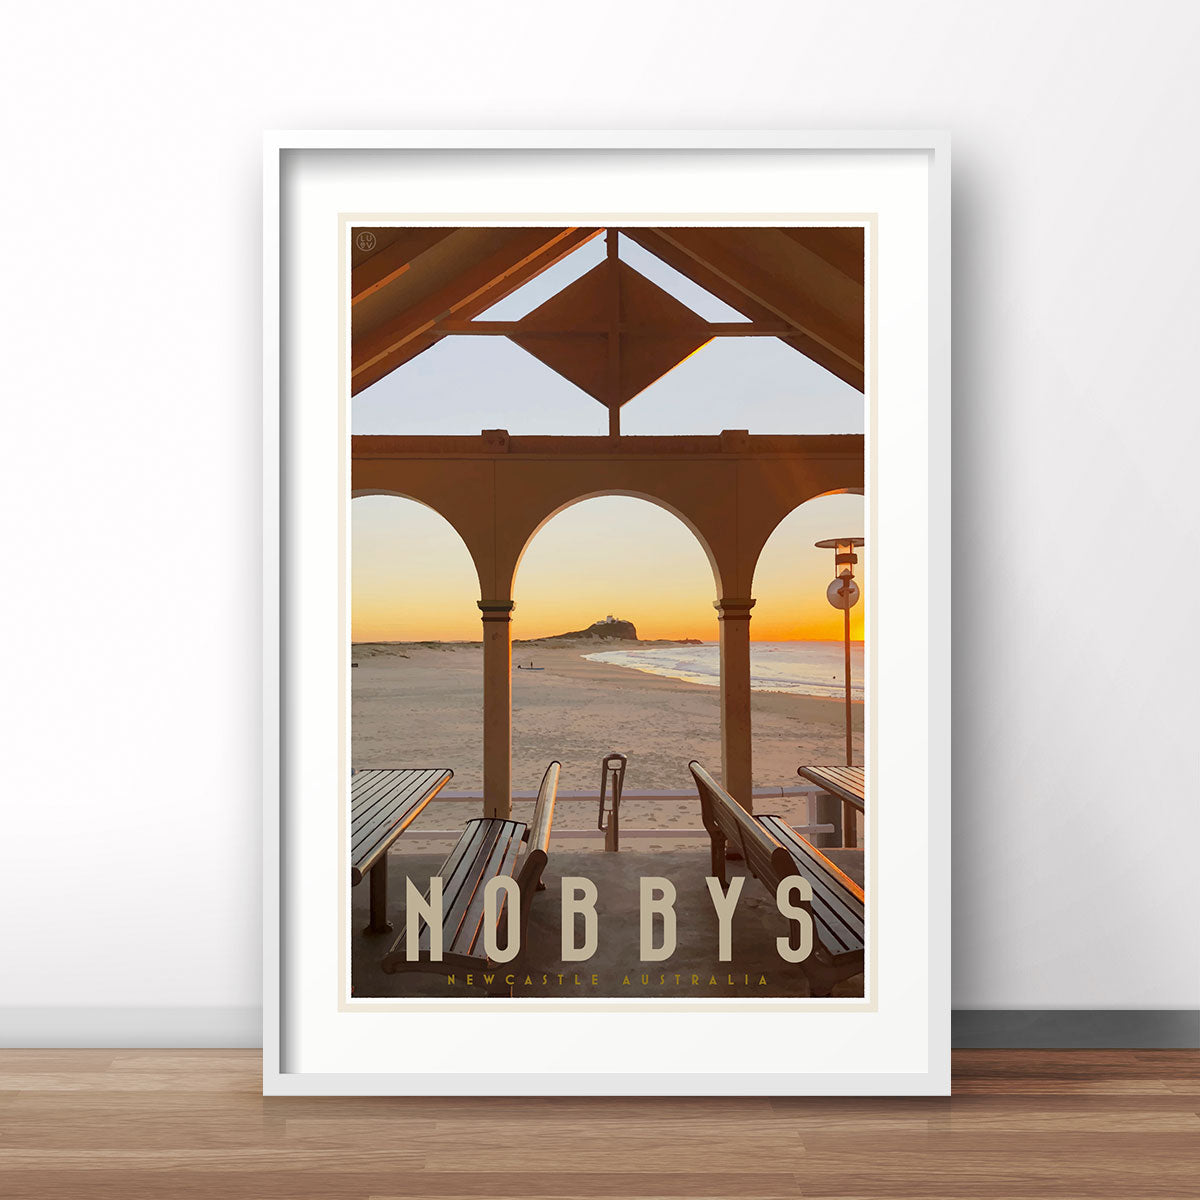 Nobbys beach newcastle vintage travel poster by placesweluv